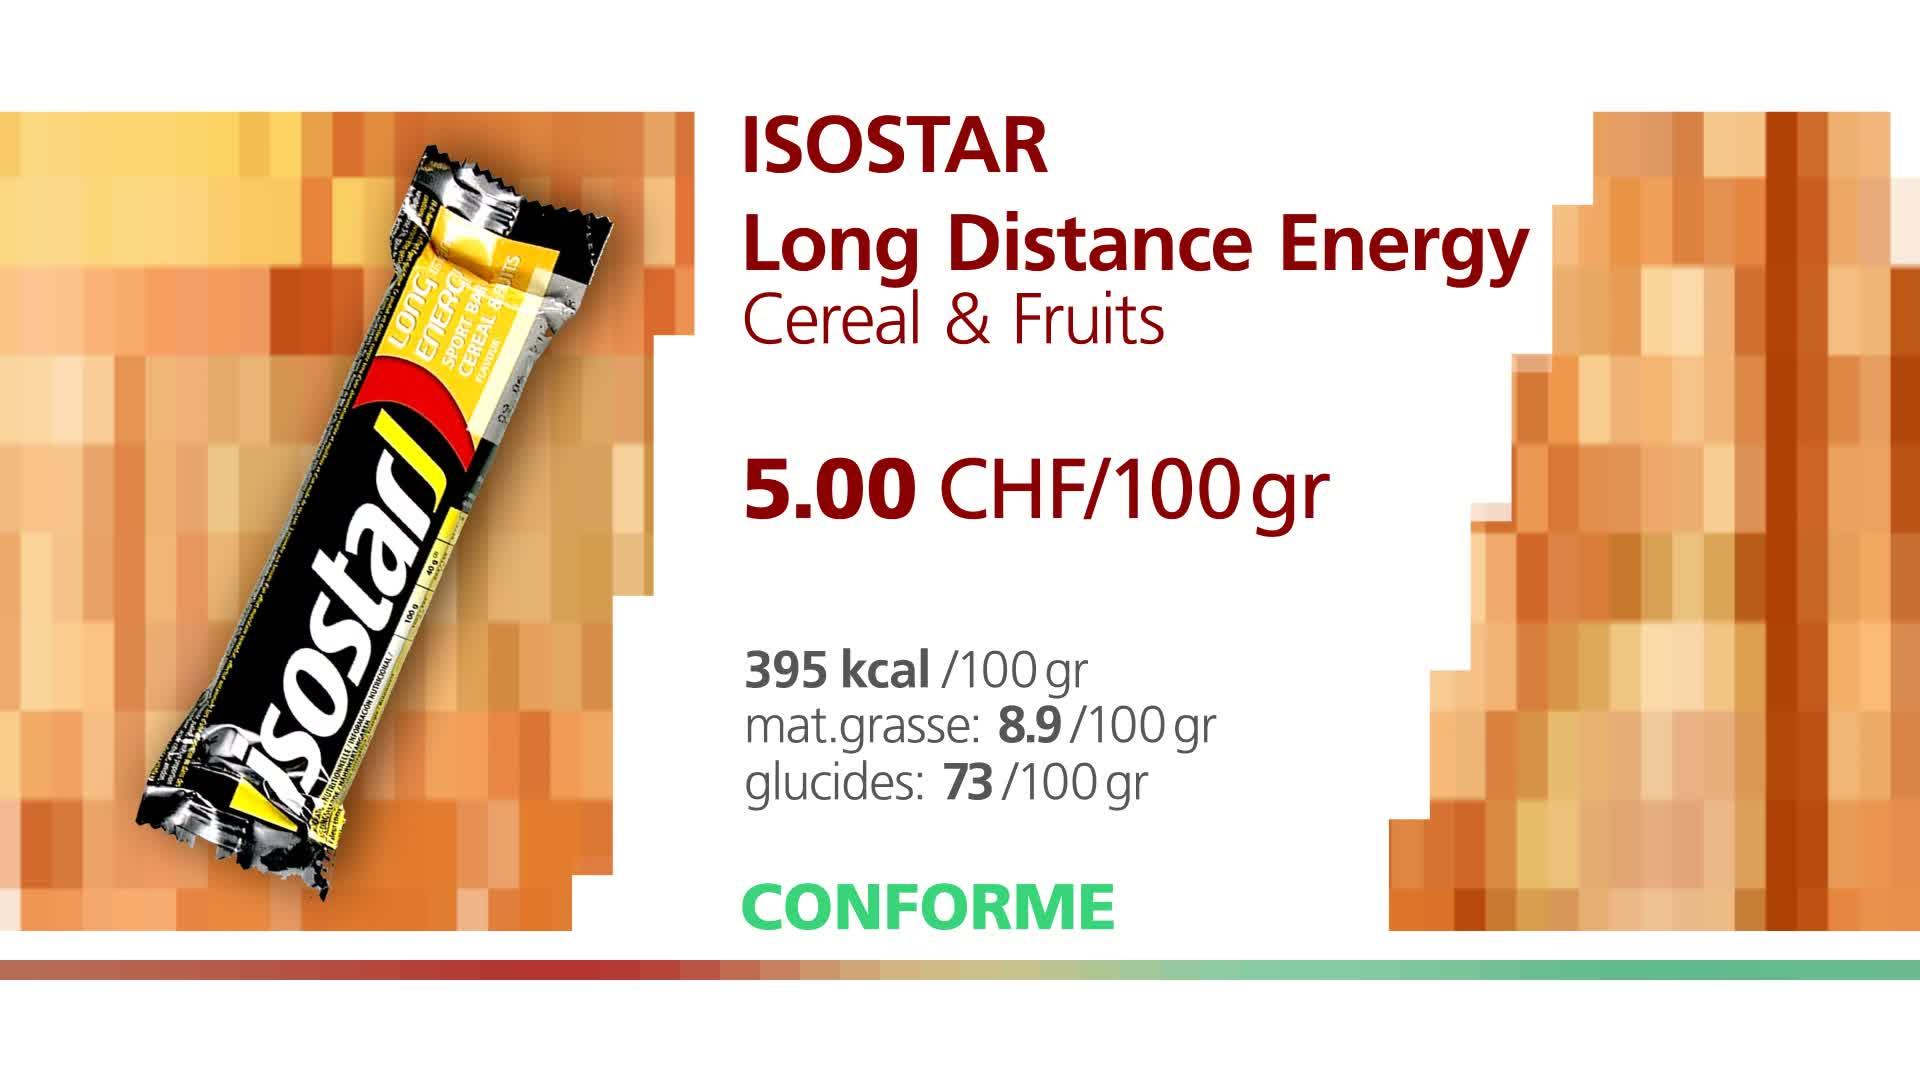 Isostar Long Distance Energy Cereal & Fruits